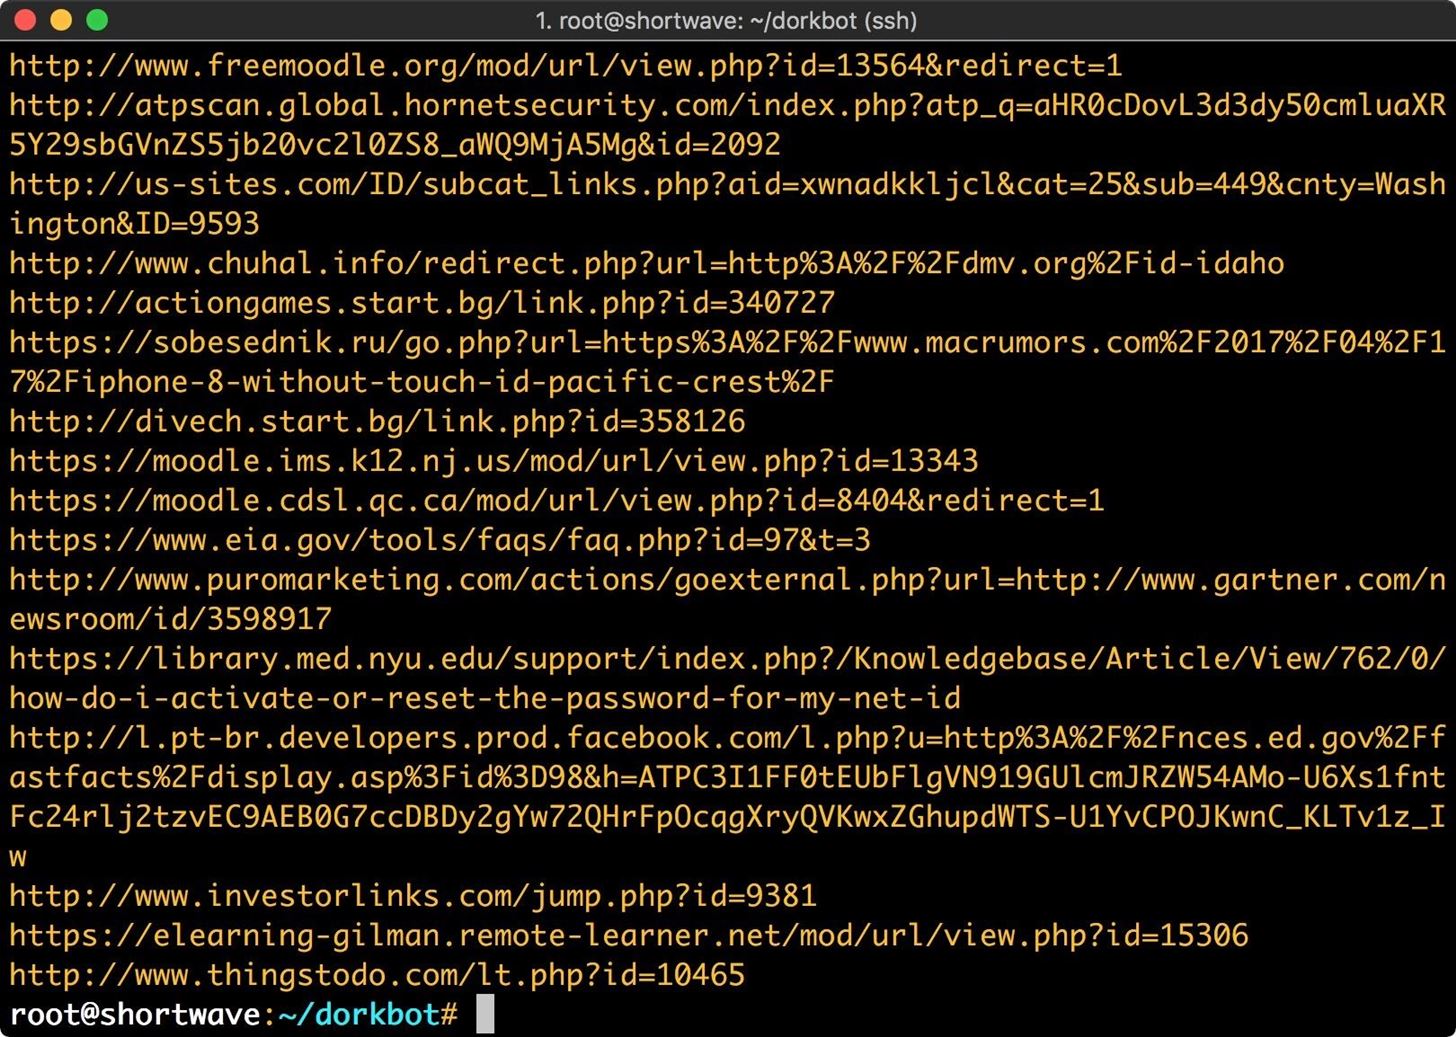 How to Use Dorkbot for Automated Vulnerability Discovery